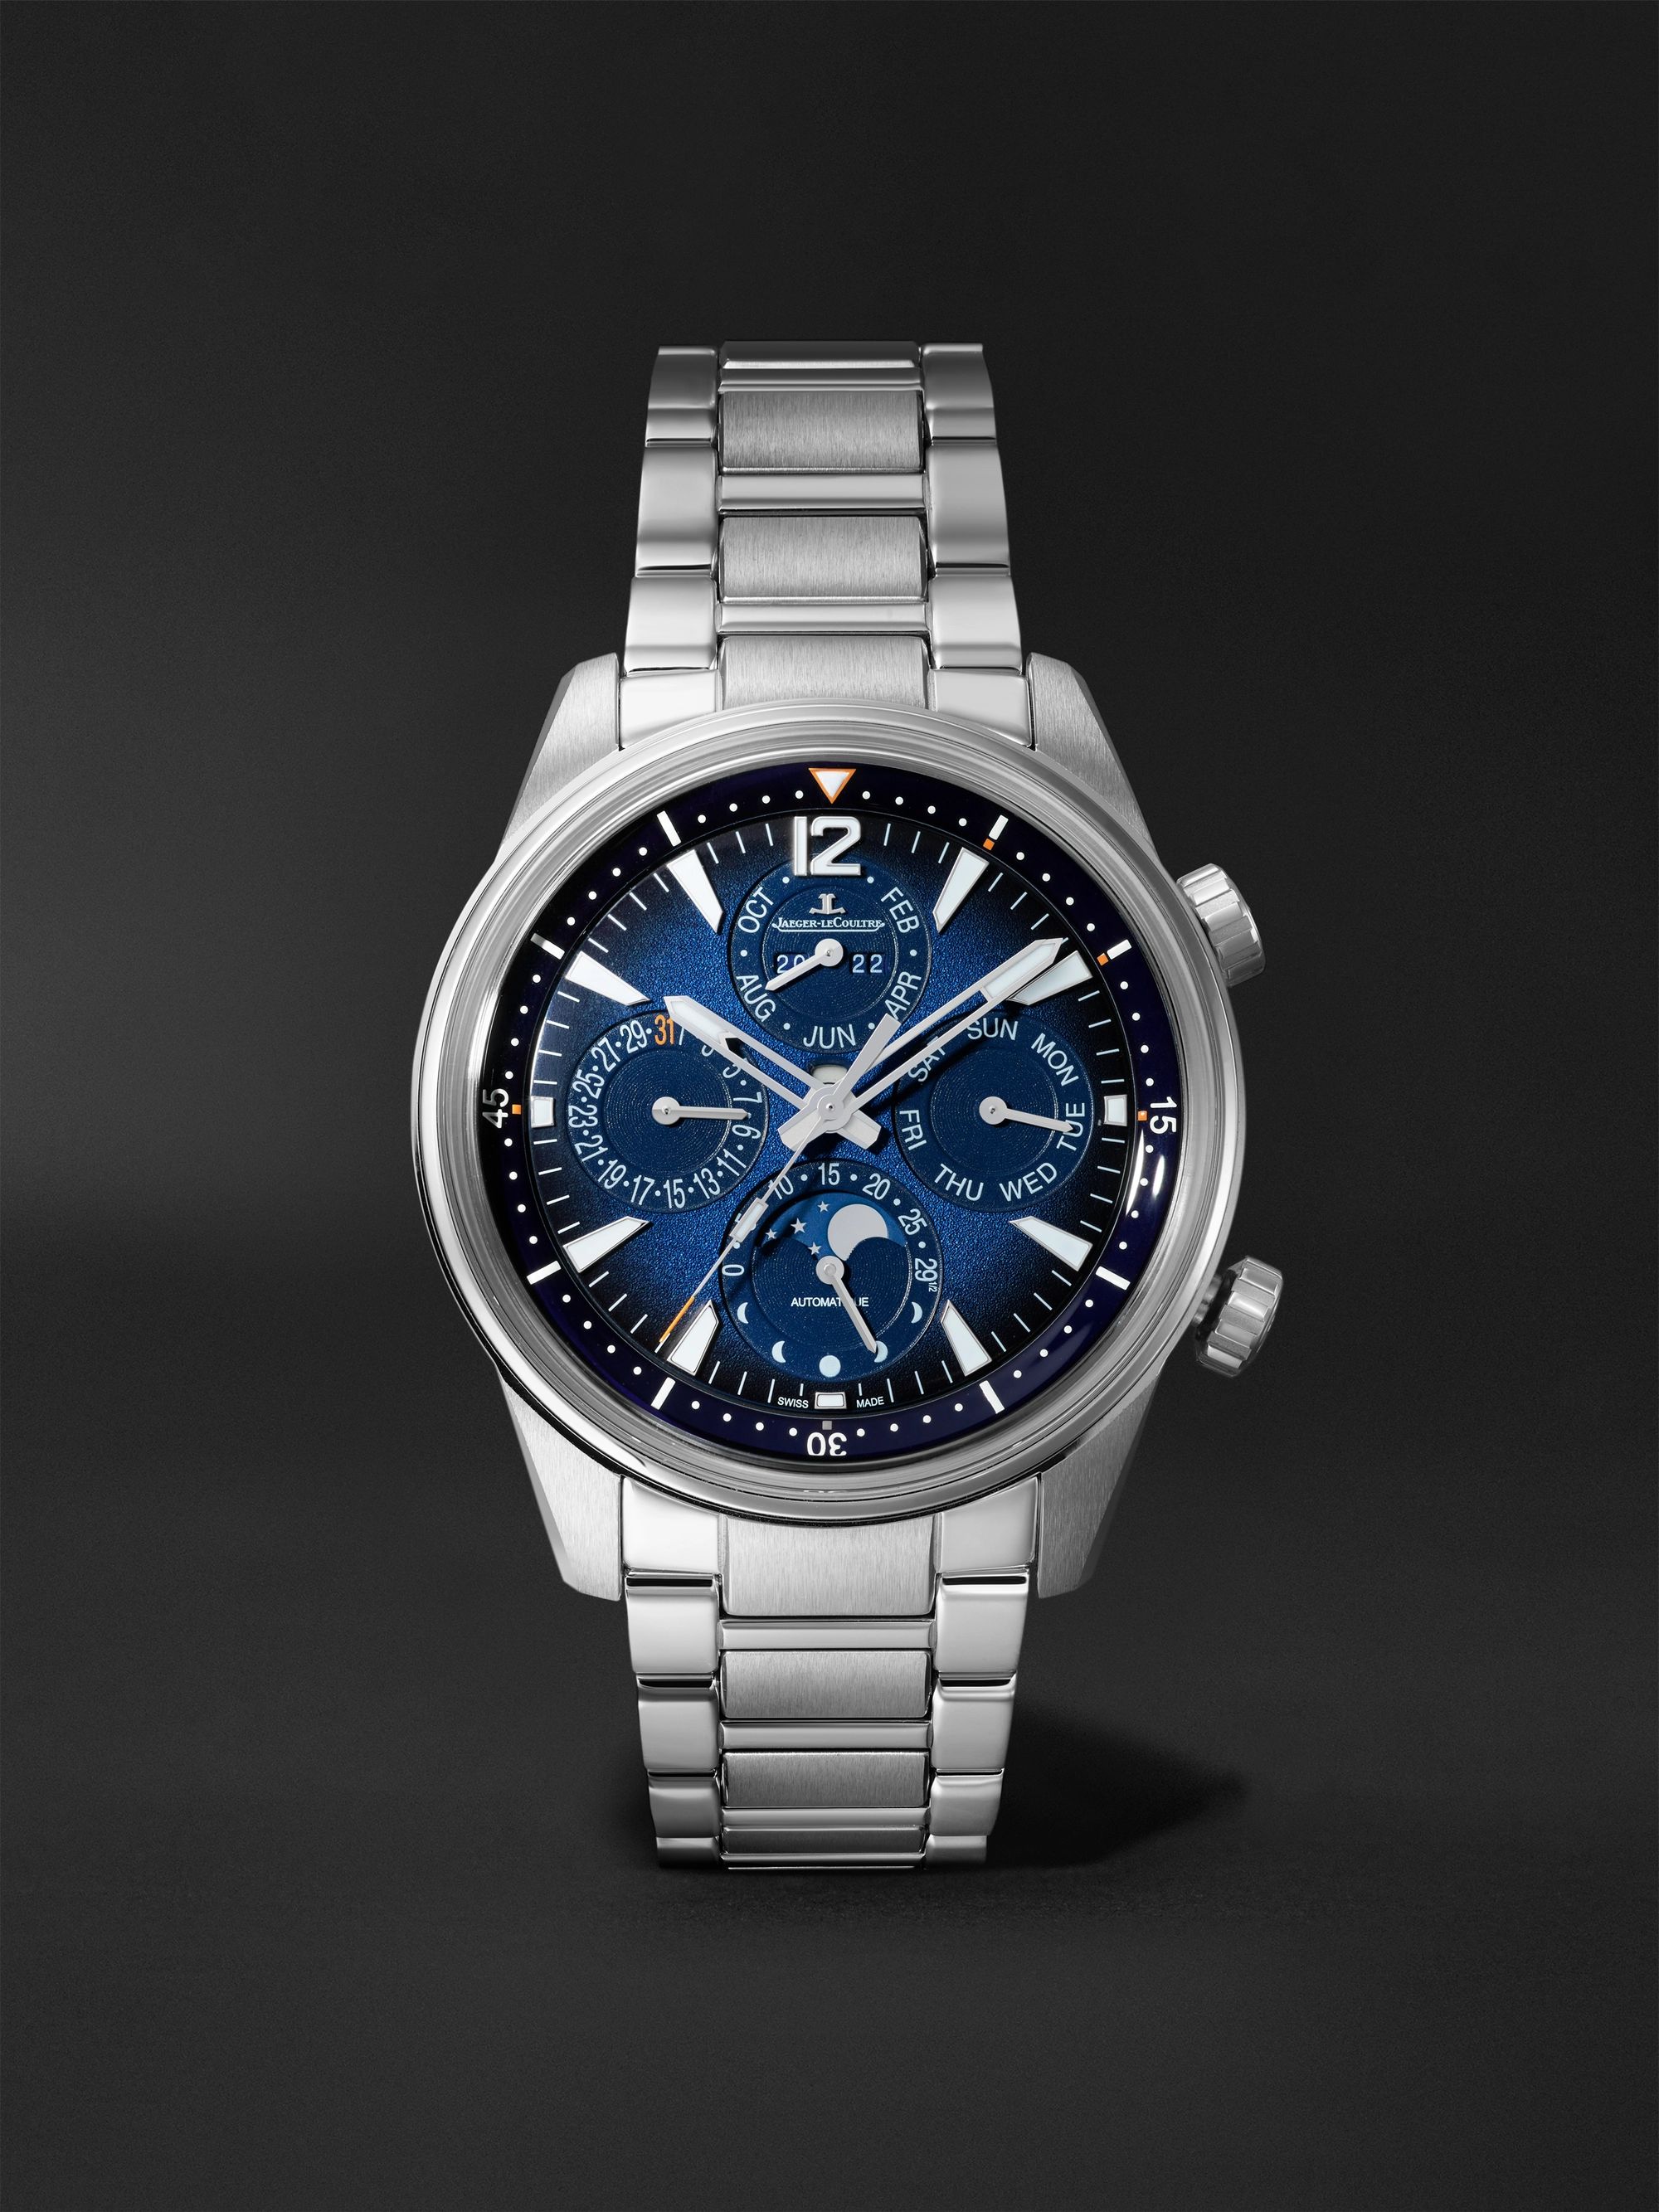 JAEGER-LECOULTRE Polaris Perpetual Calendar Automatic 42mm Stainless Steel Watch, Ref. No. 9088180